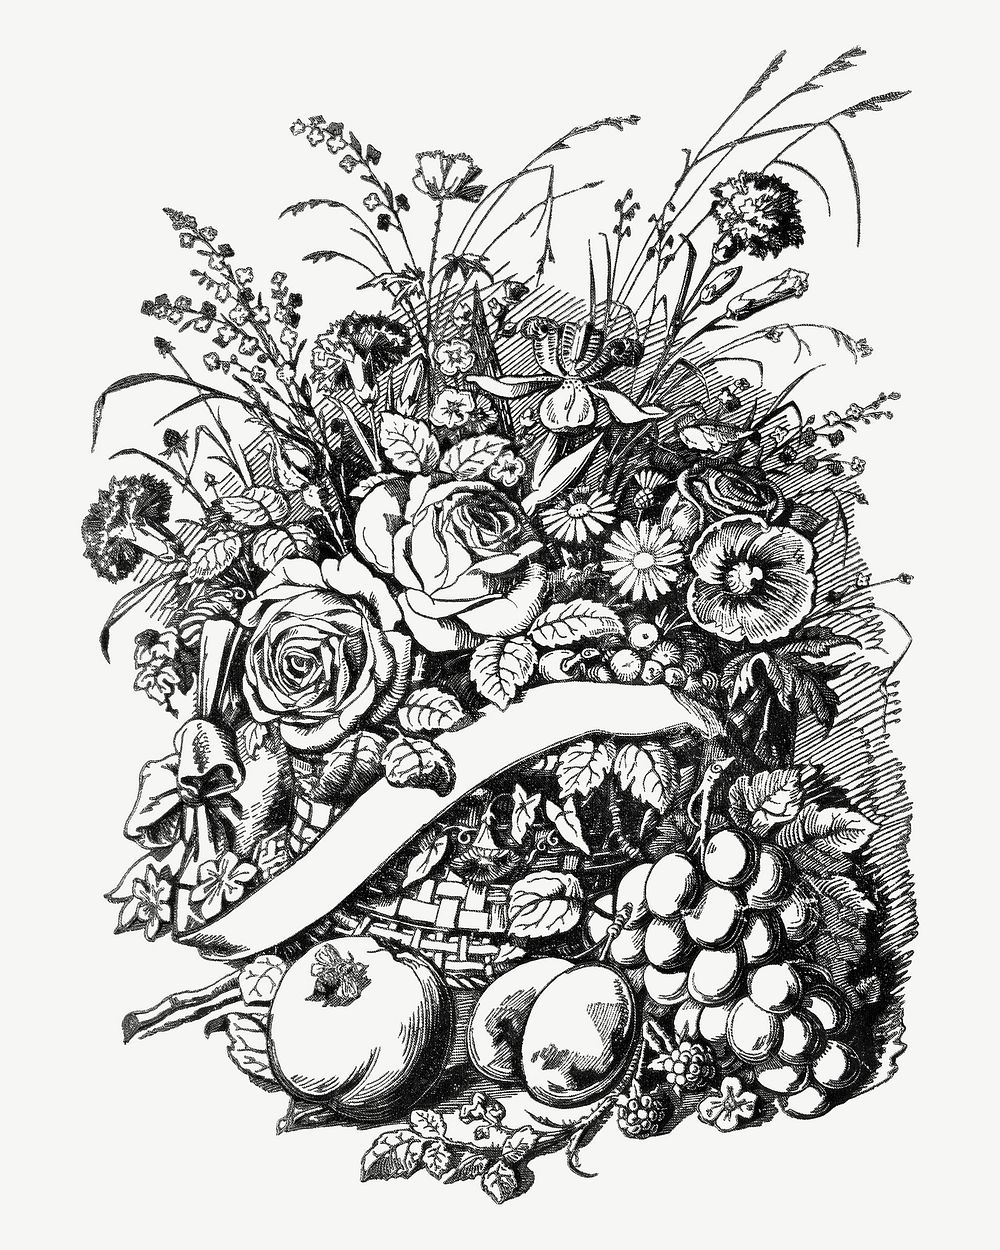 Vintage flowers black & white illustration, collage element psd. Remixed from our own original 1879 edition of Nederlandsche…